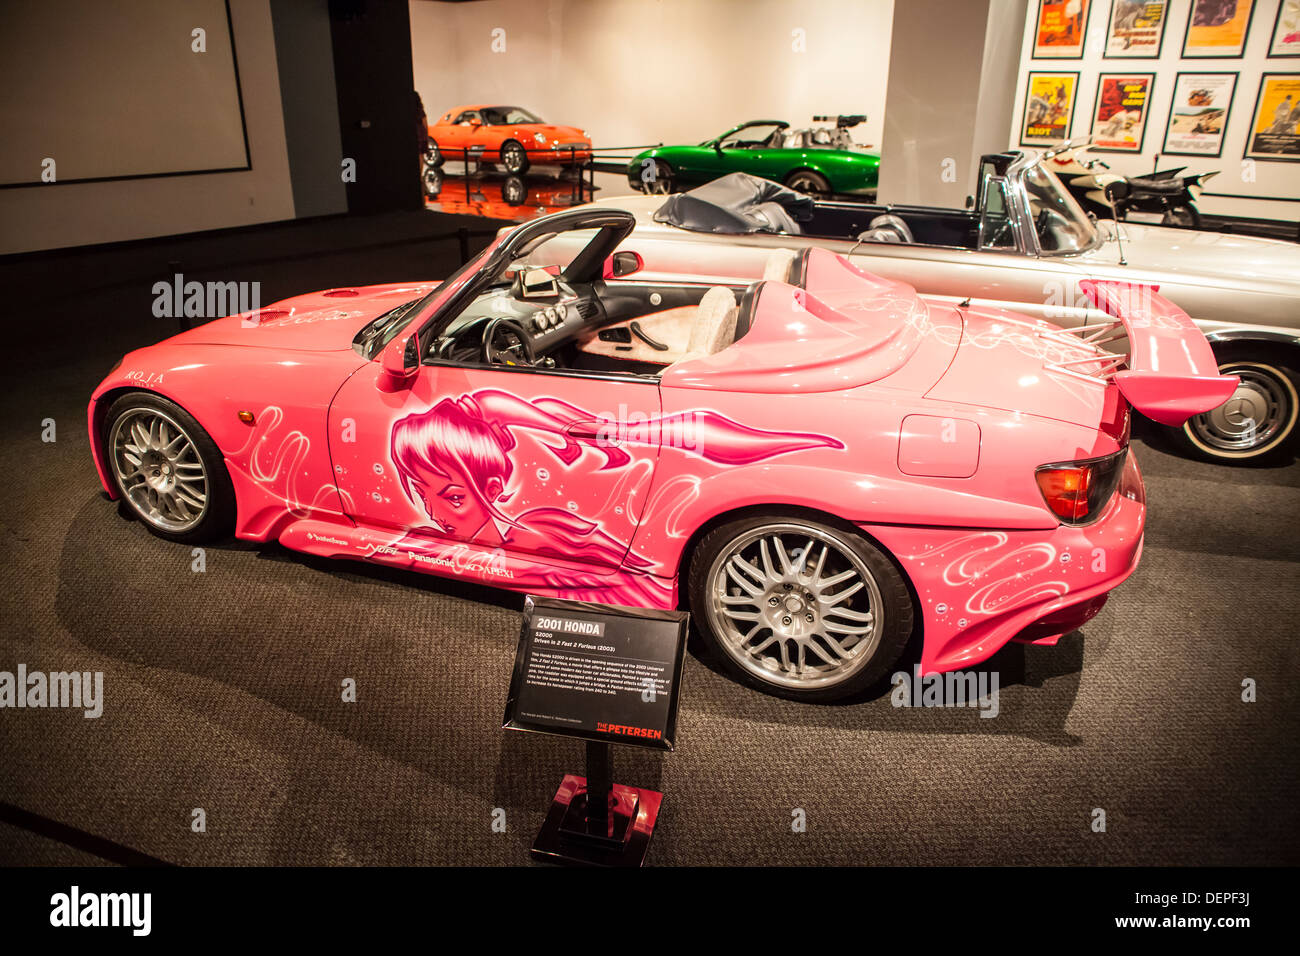 From The Movie 2 Fast 2 Furious This Is Suki S Pink Honda S00 At The Petersen Museum In Los Angeles California Stock Photo Alamy